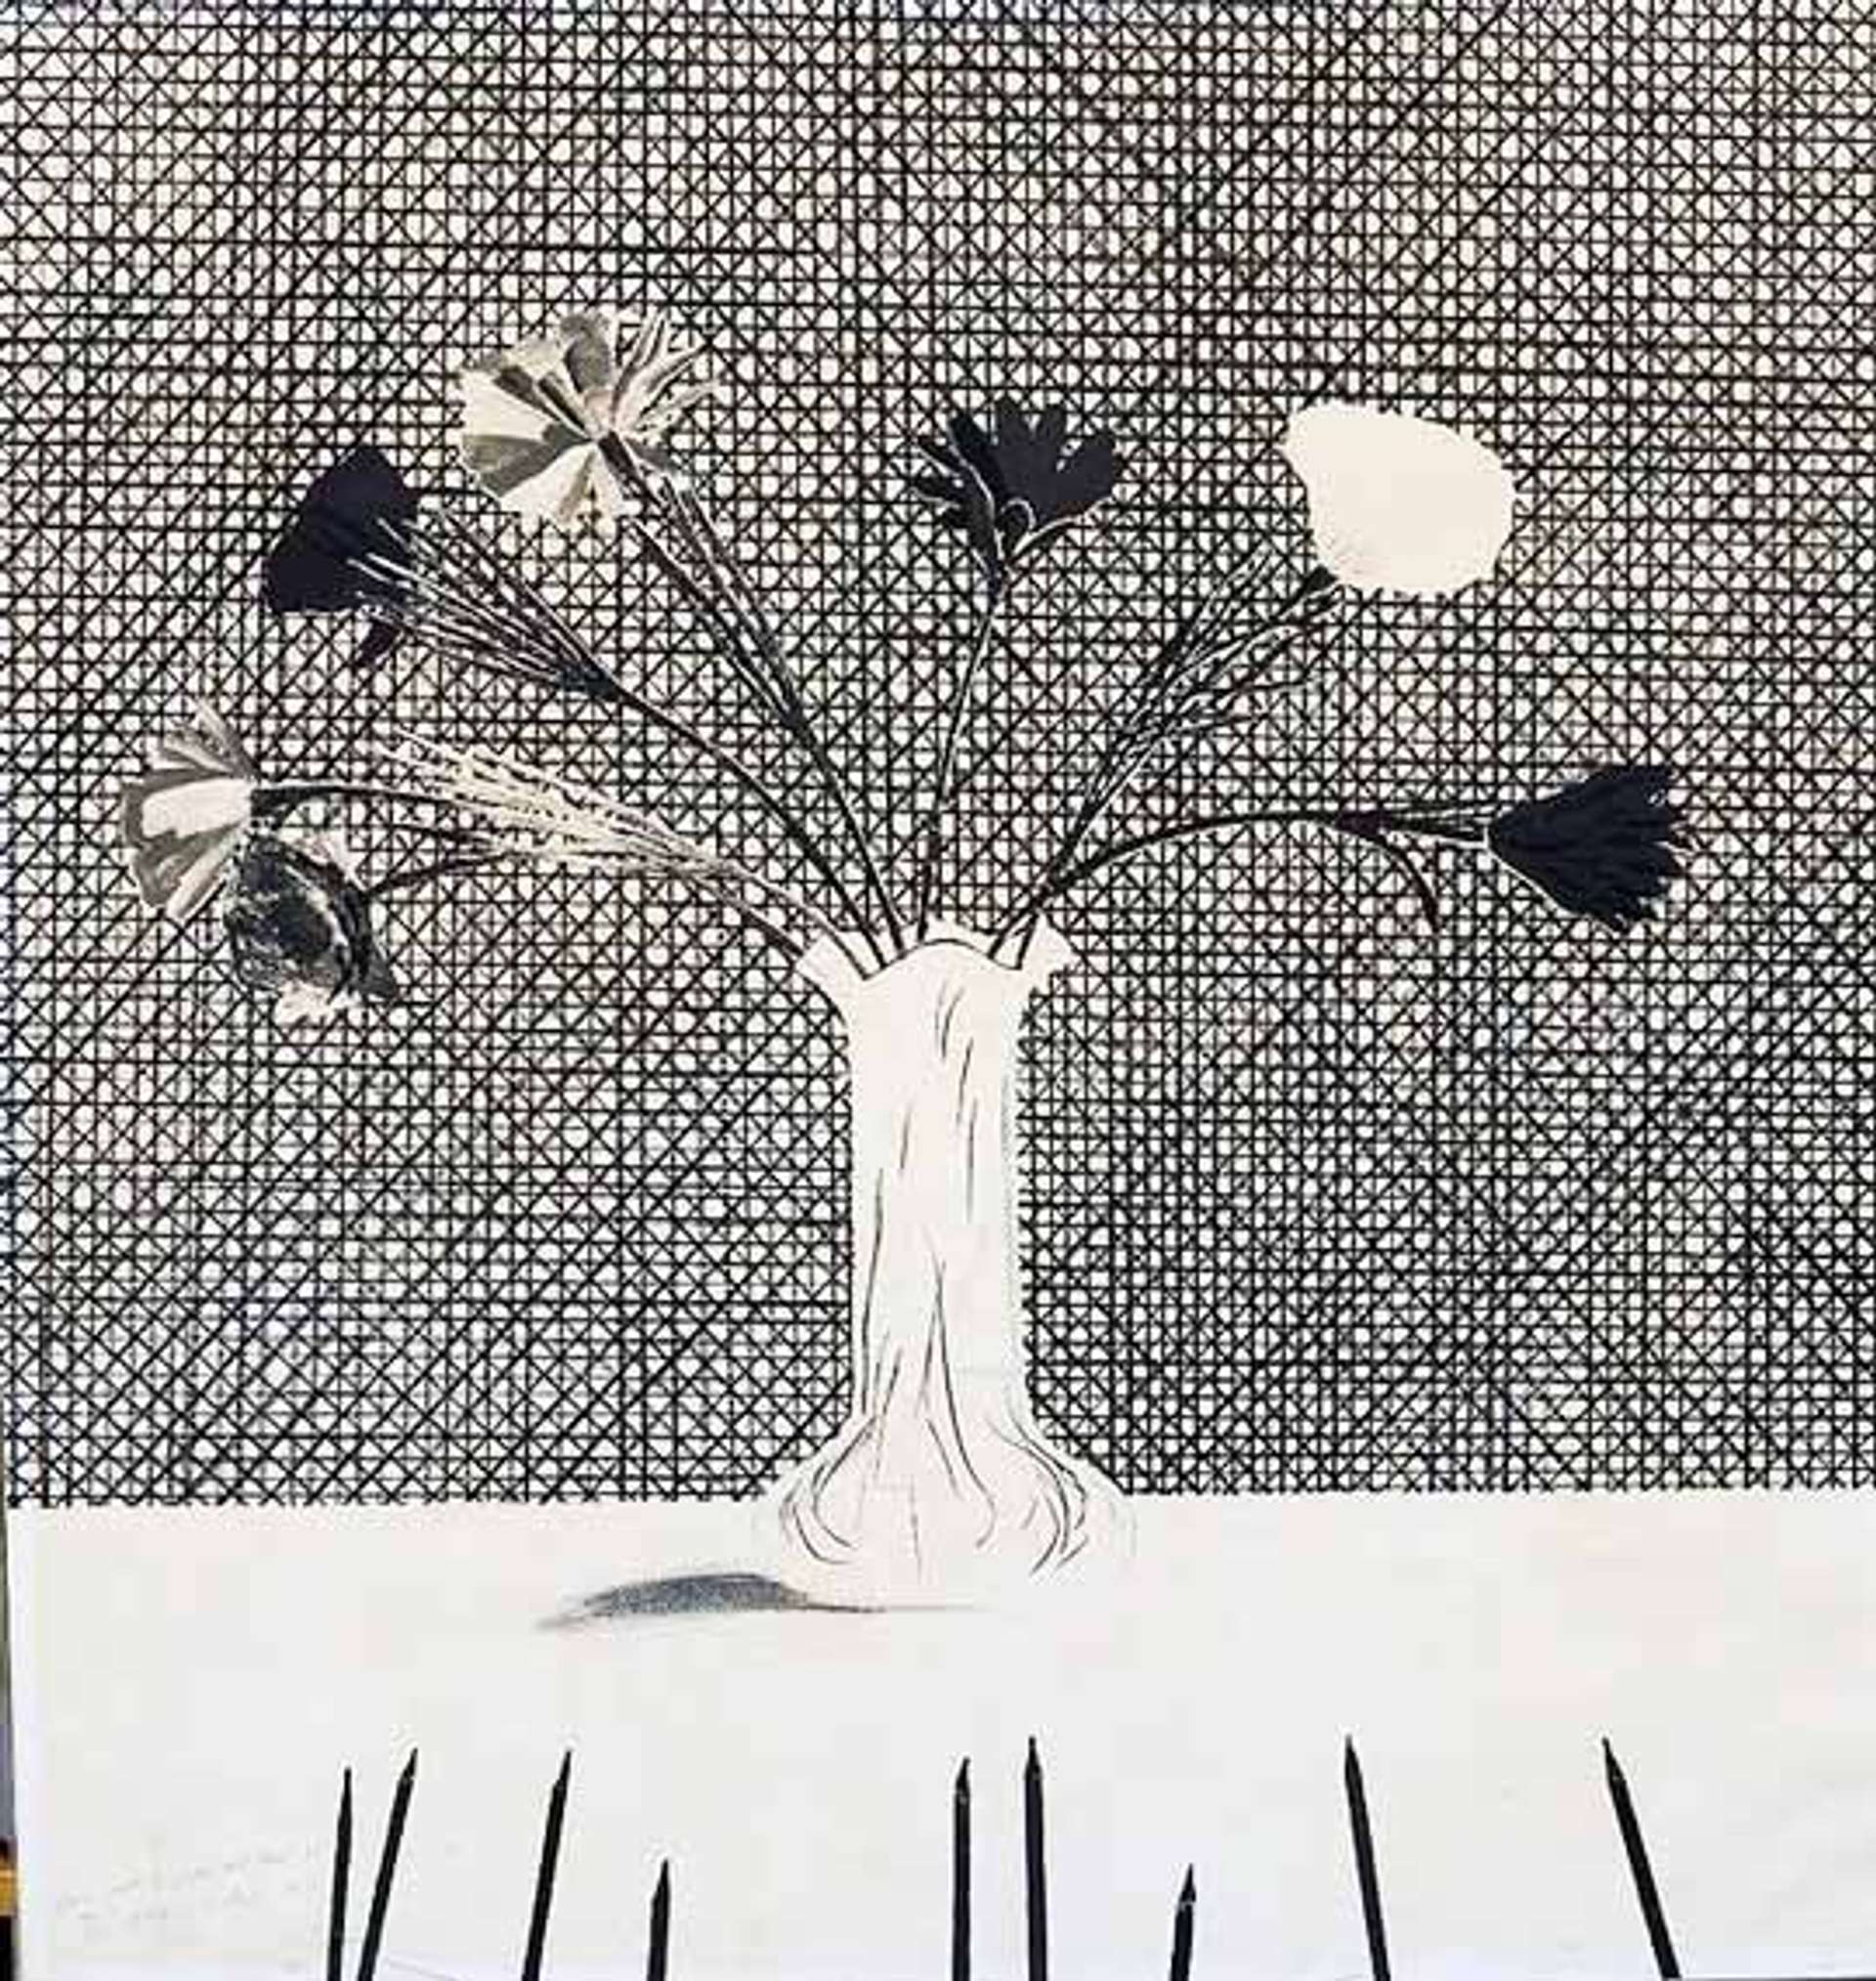 Flowers Made Of Paper And Black Ink by David Hockney